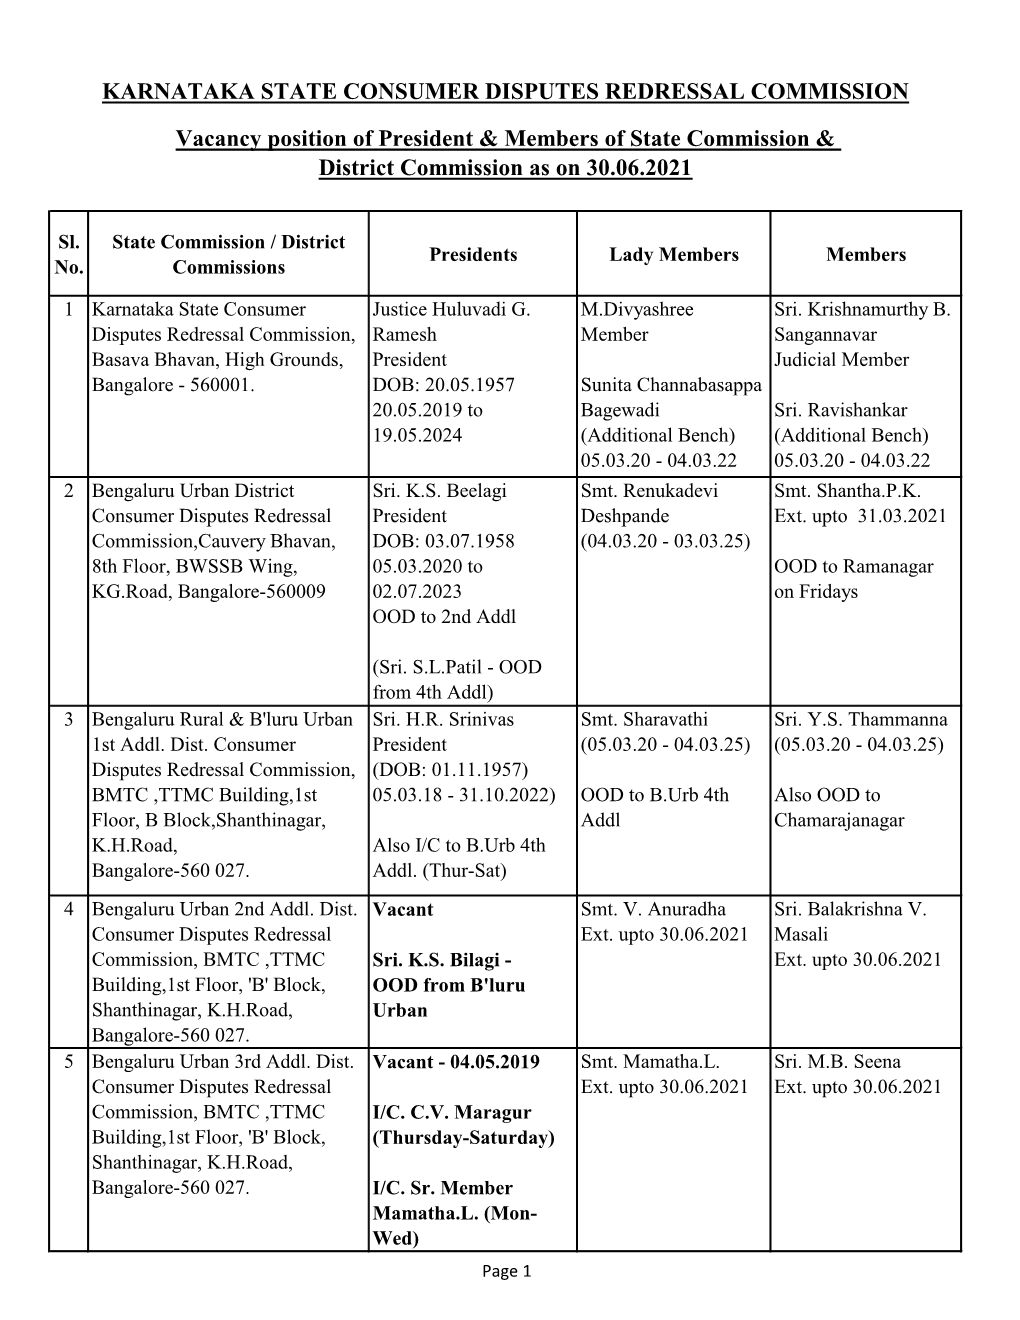 District Commission As on 30.06.2021